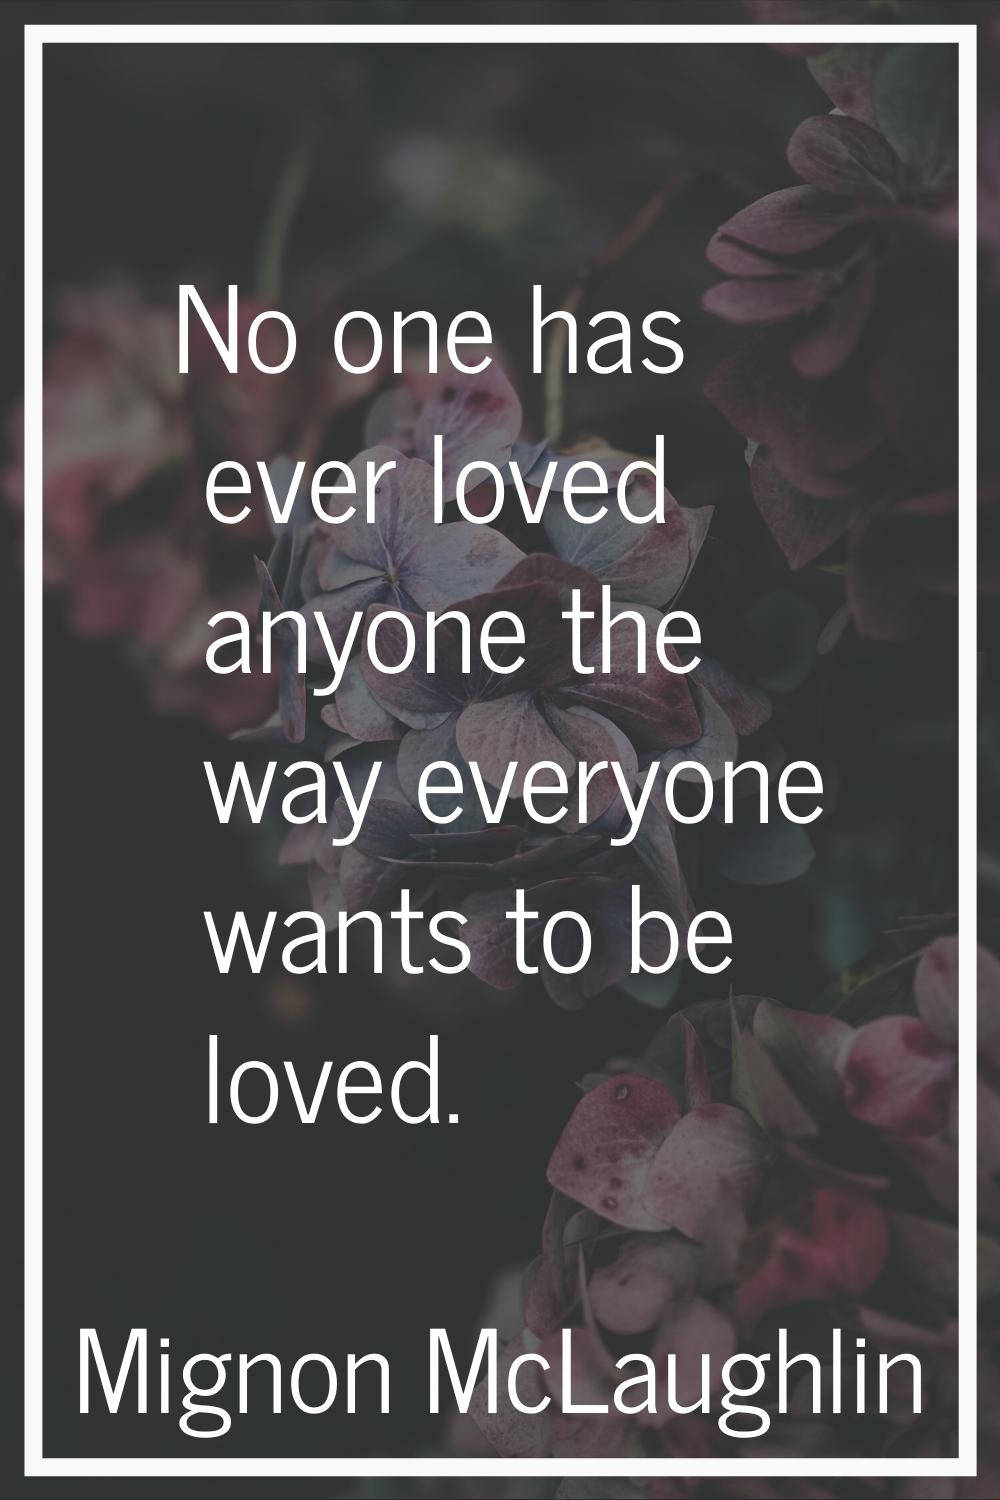 No one has ever loved anyone the way everyone wants to be loved.